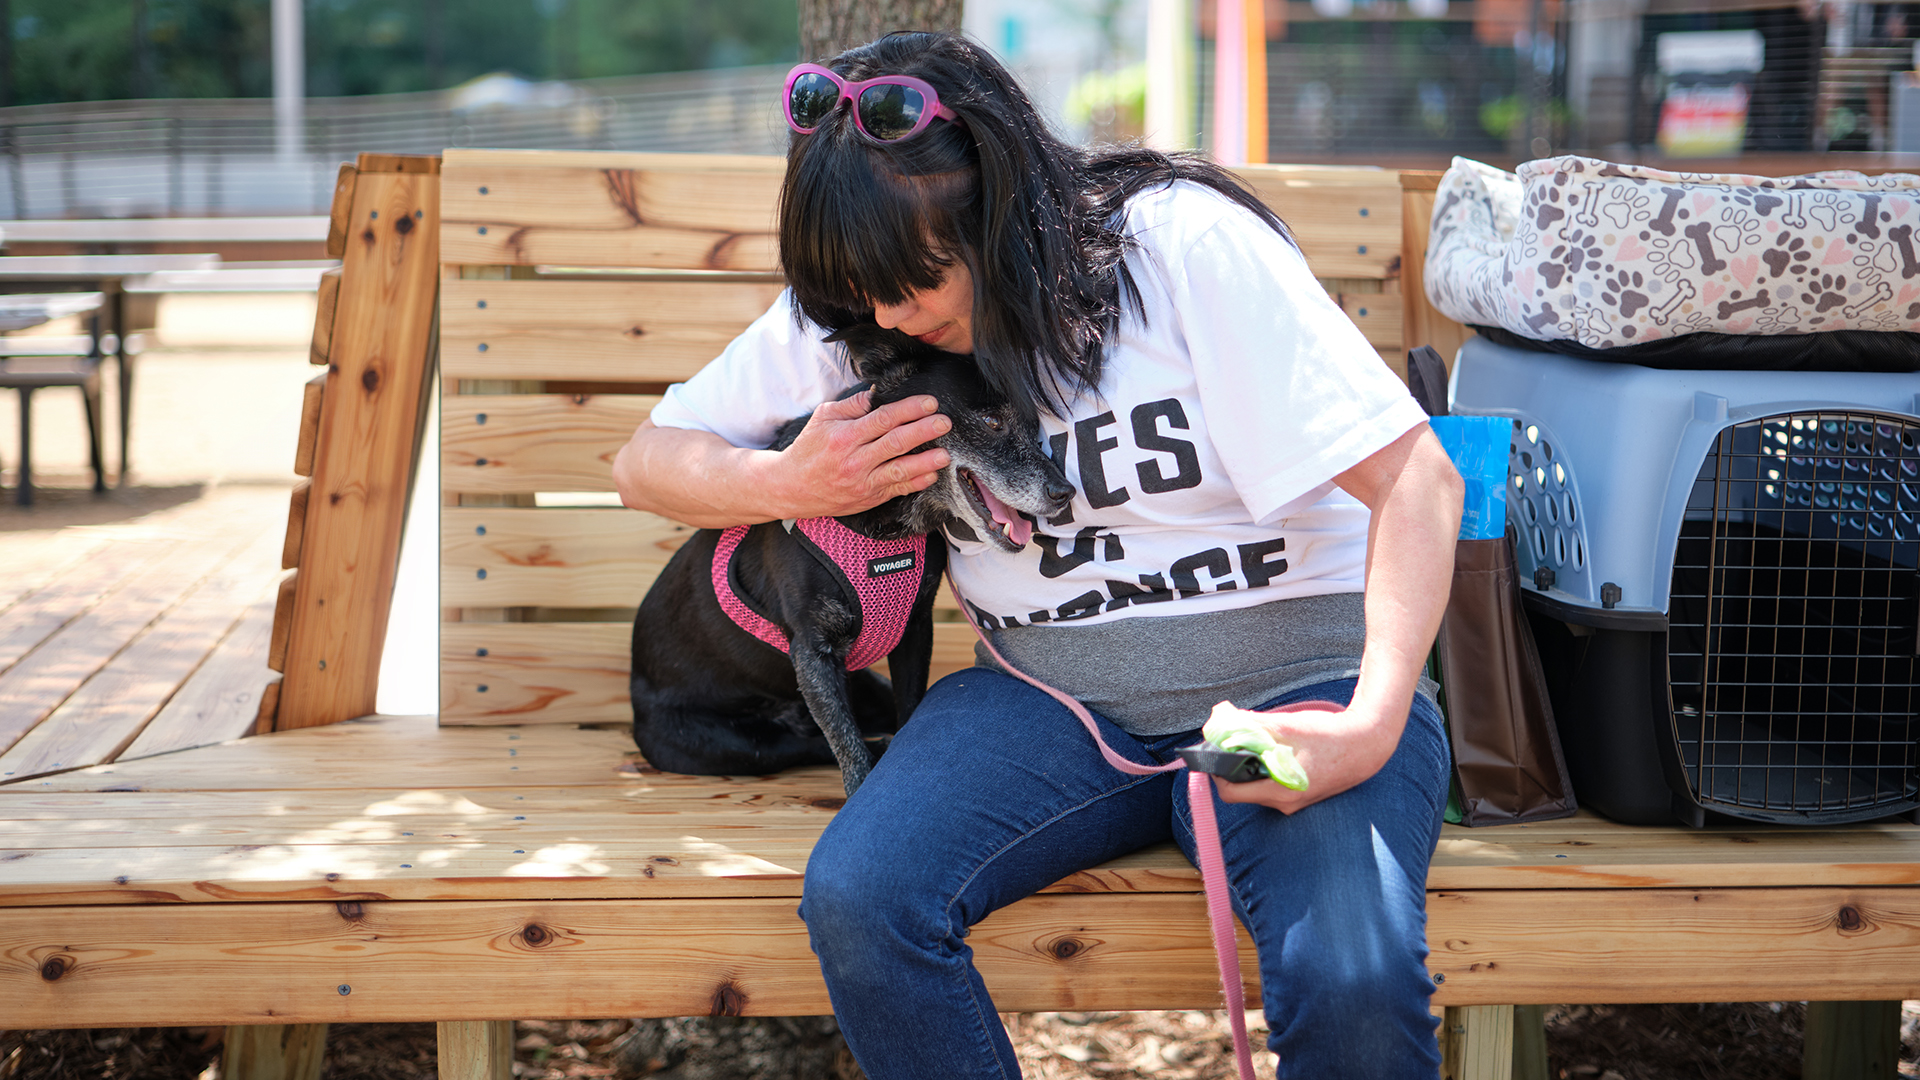 A woman hugs small black dog on wooden bench next to a small dog crate.